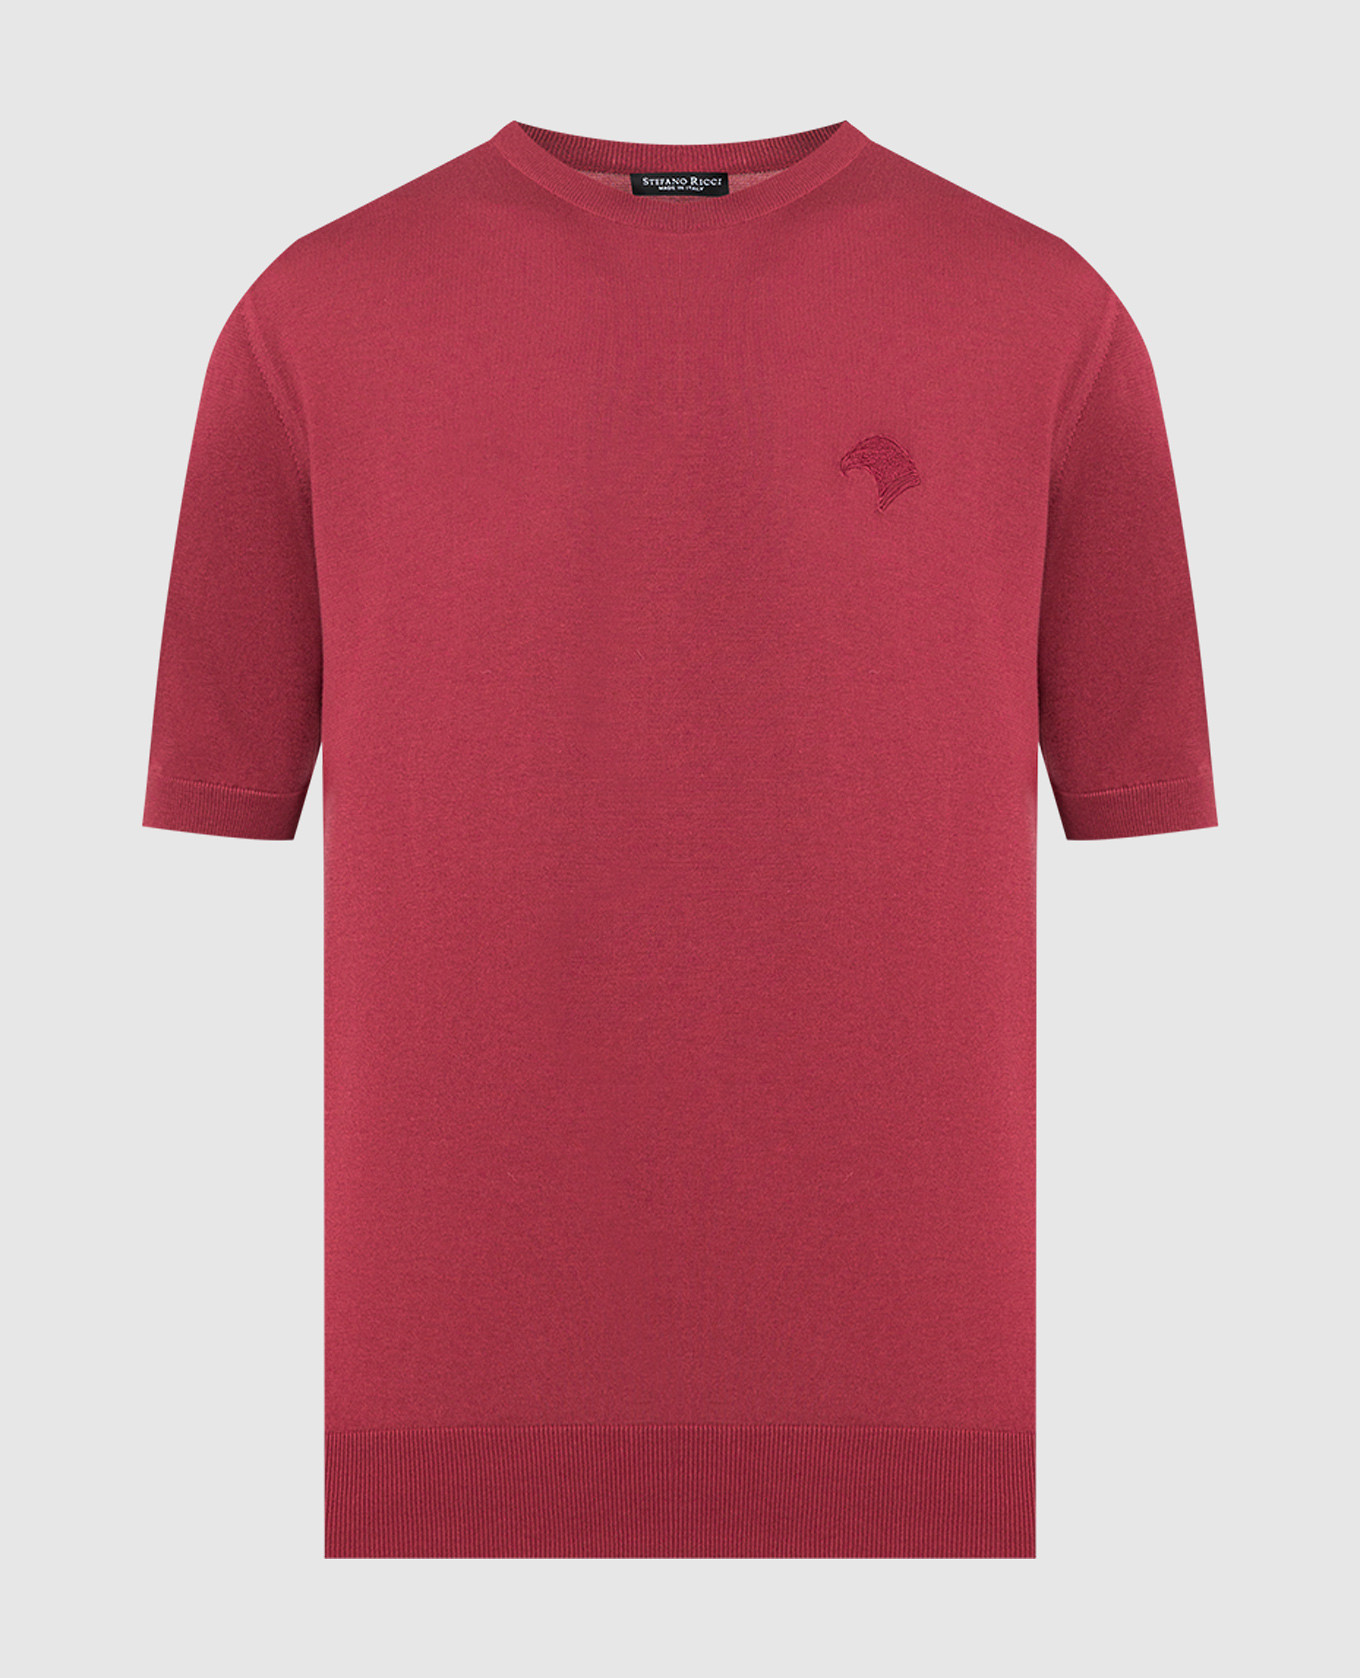 Burgundy t-shirt with logo embroidery